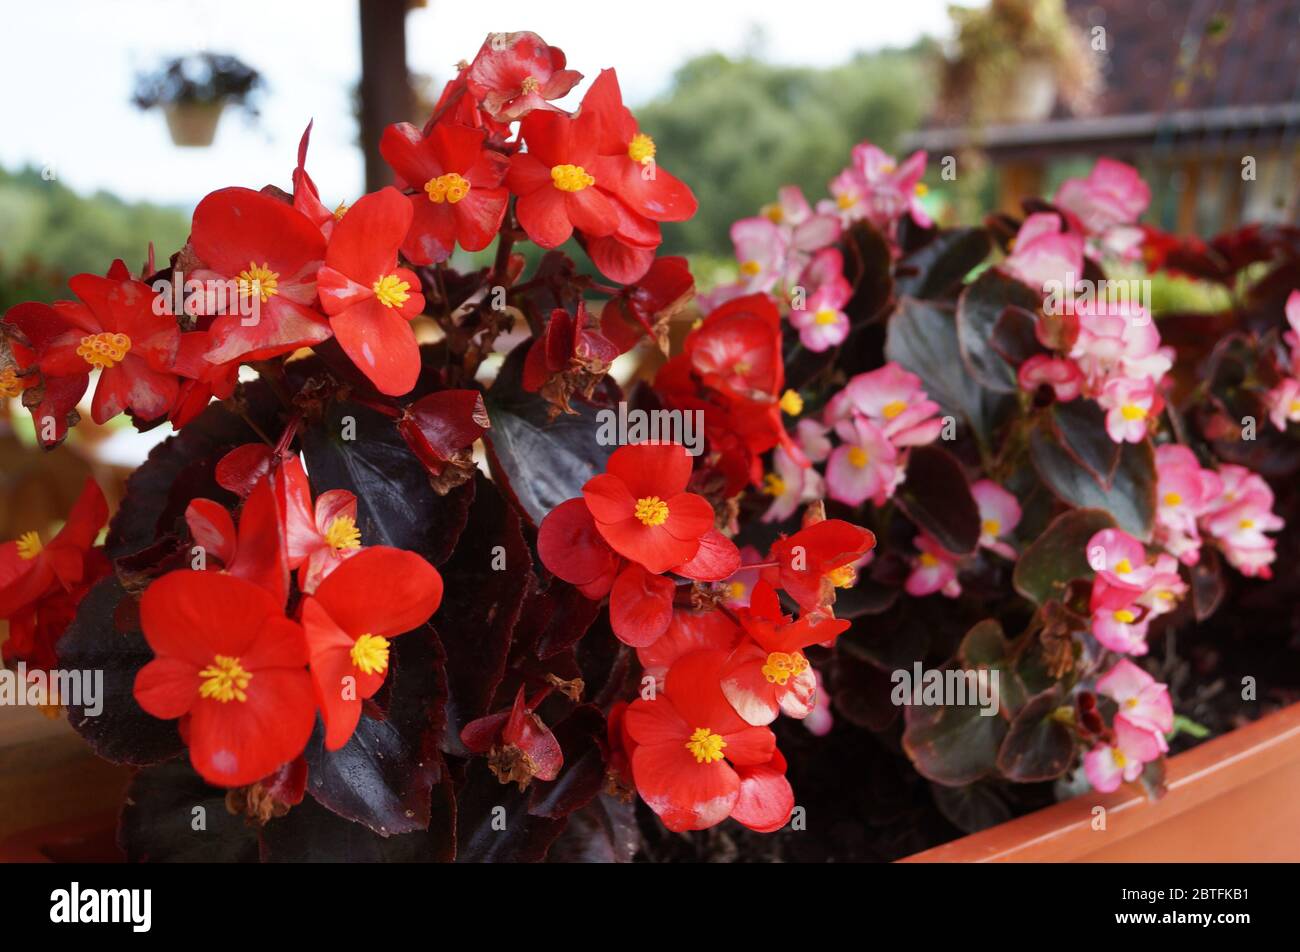 Begonia bush with shiny pink, red and white petals and a yellow center on a bush with dark burgundy leaves Stock Photo